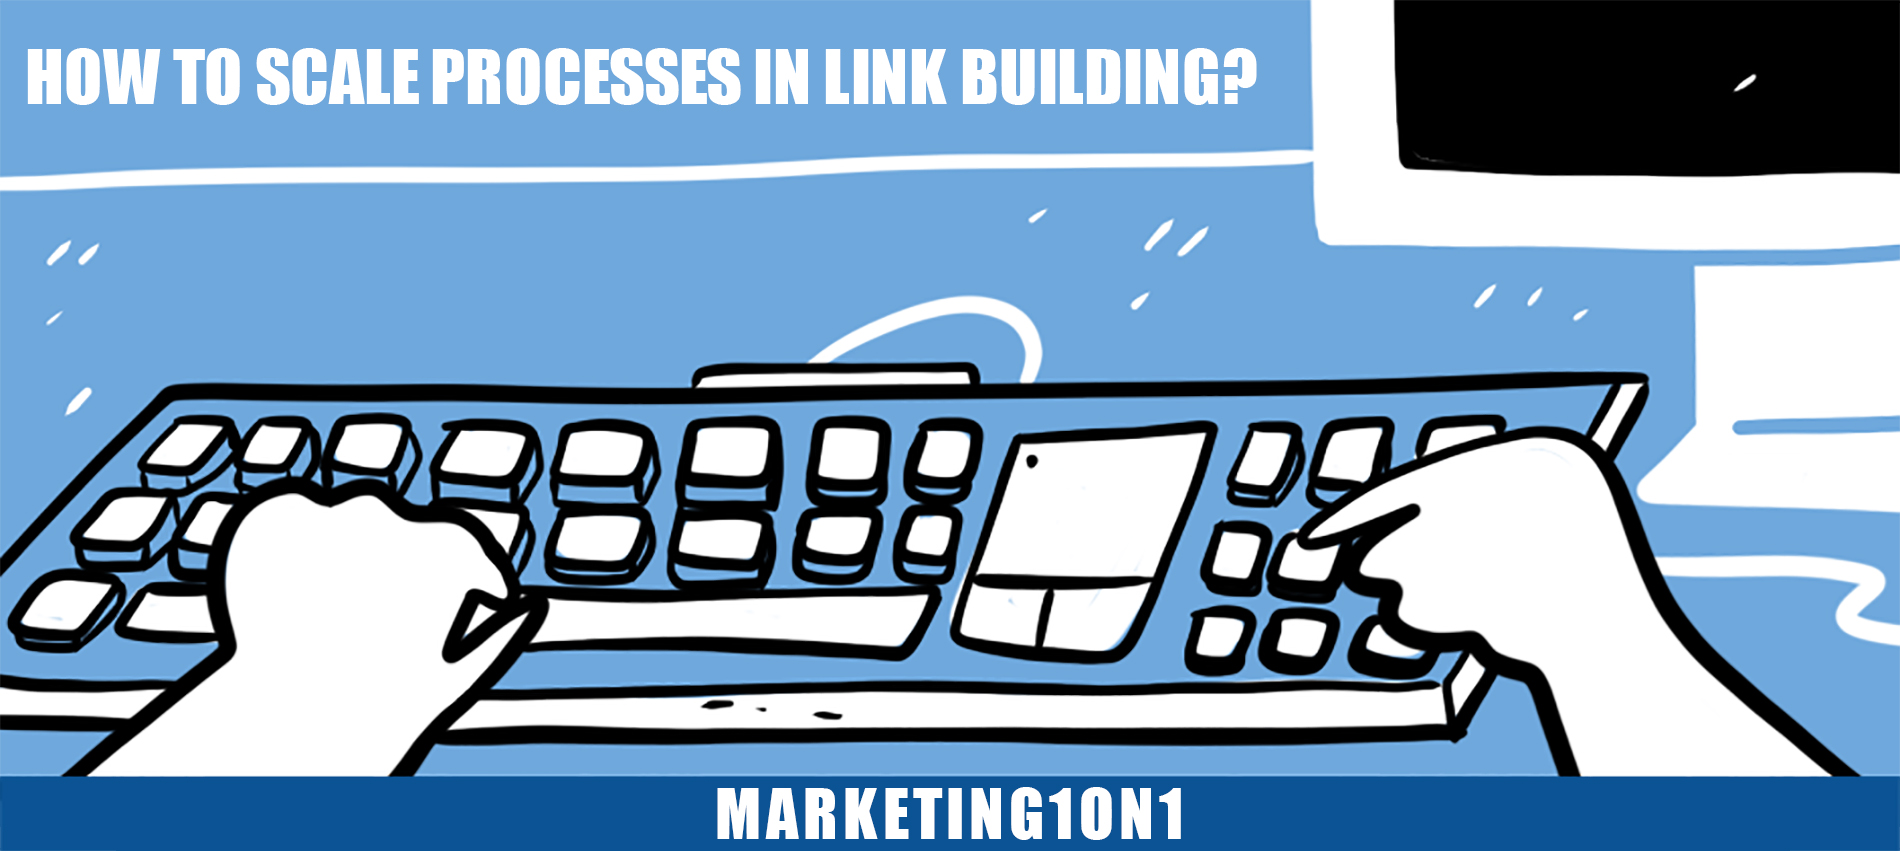 How to scale processes in link building?